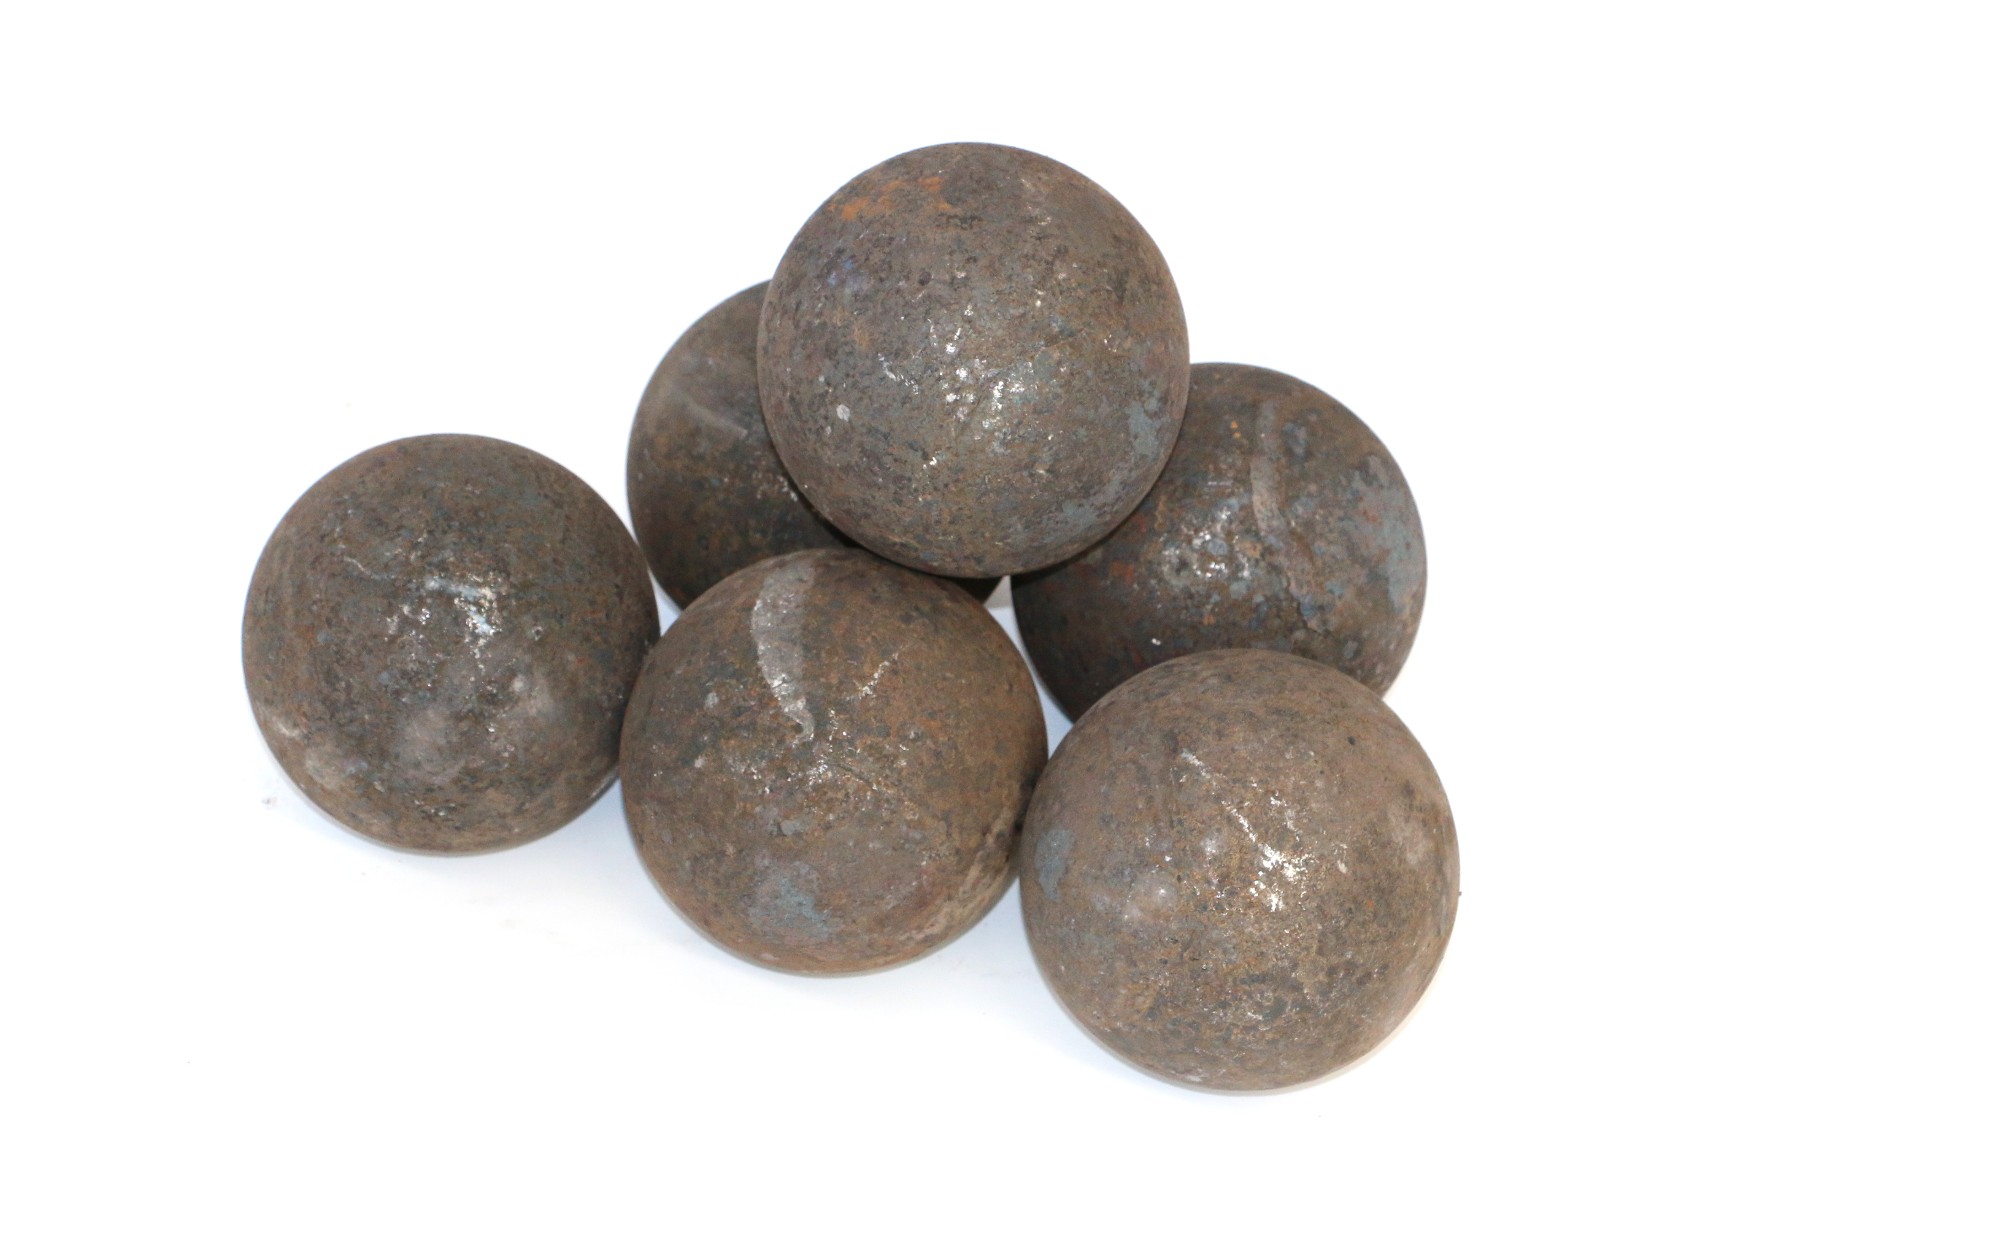 Produce Cheap Grinding Steel Balls For Gold Mining,Grinding steel balls Factory